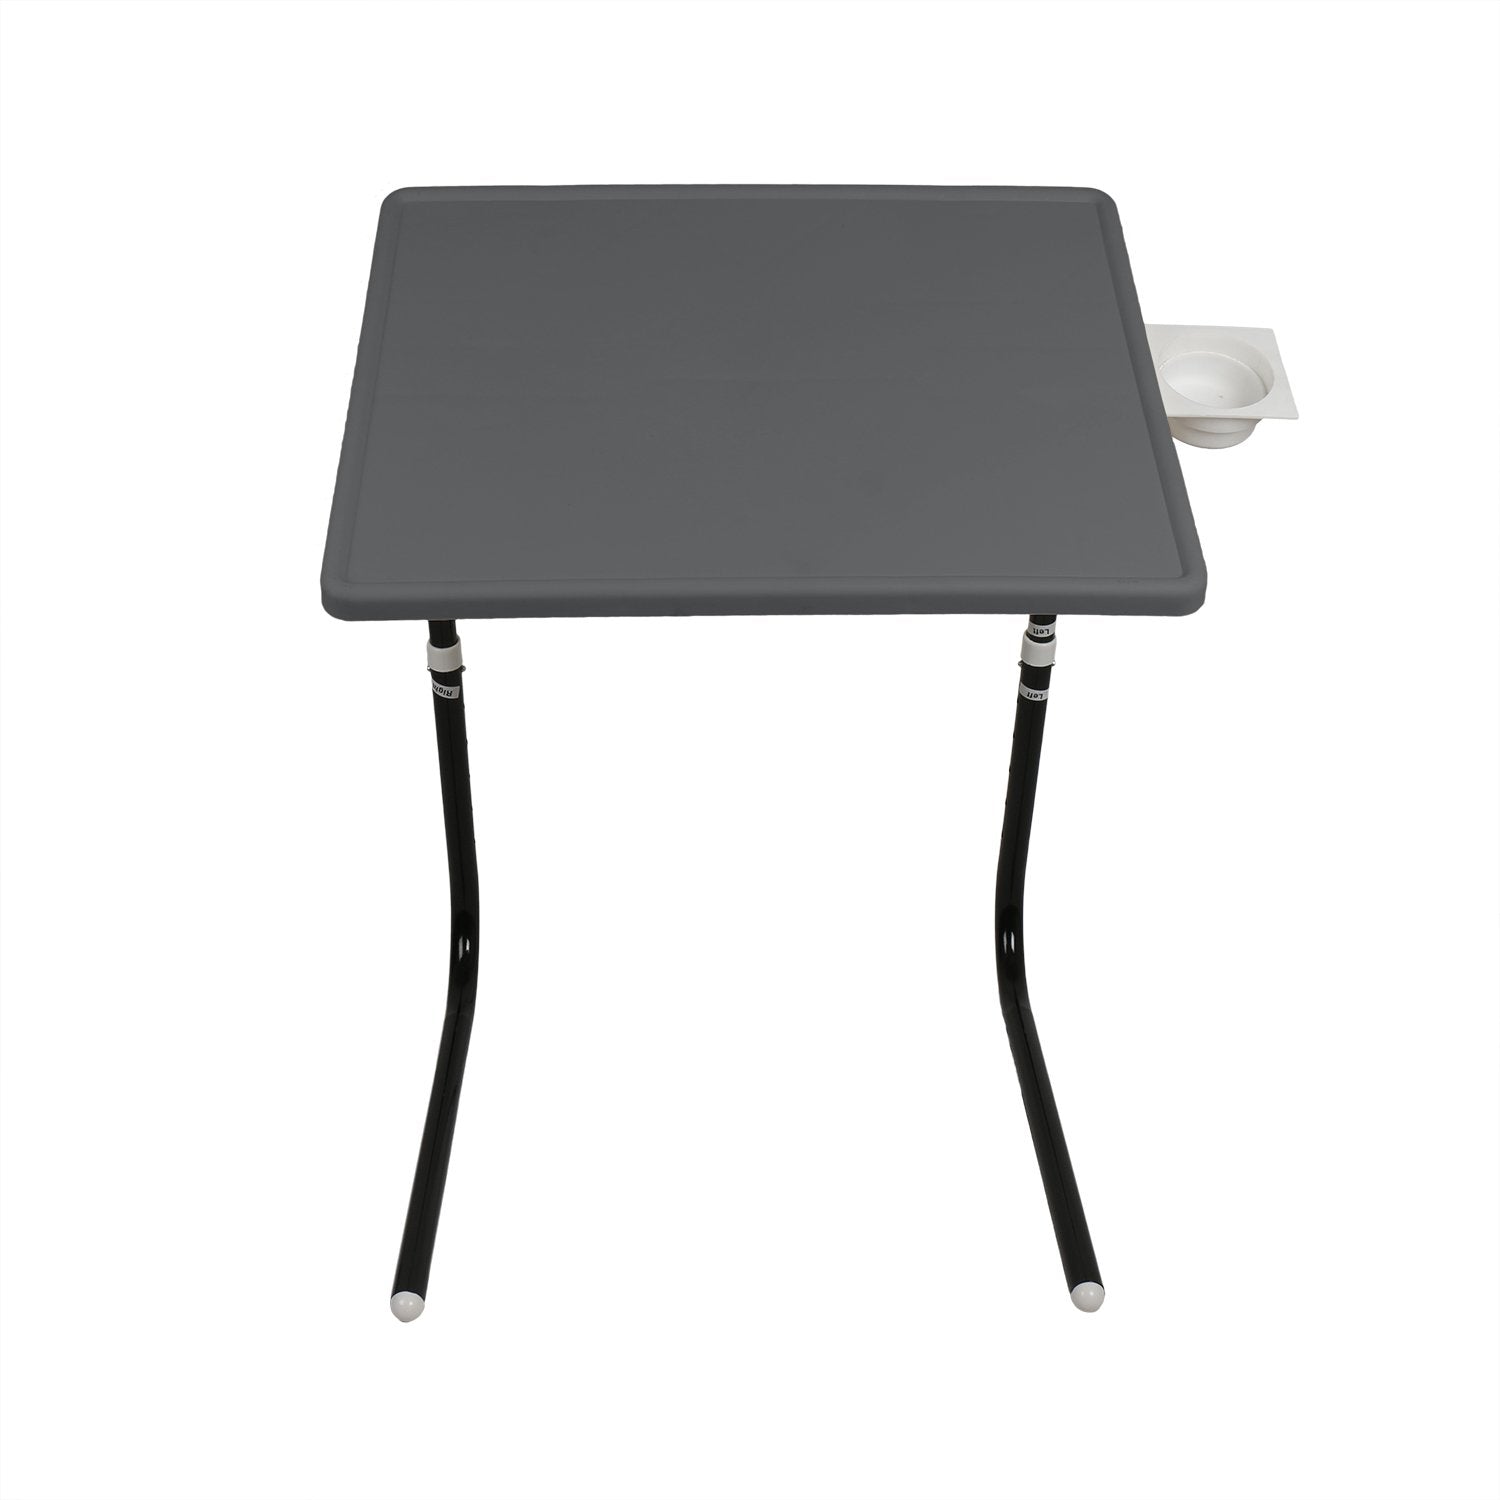 Multi utility Laptop Table with Black legs Combo pack Medium Yellow & Grey